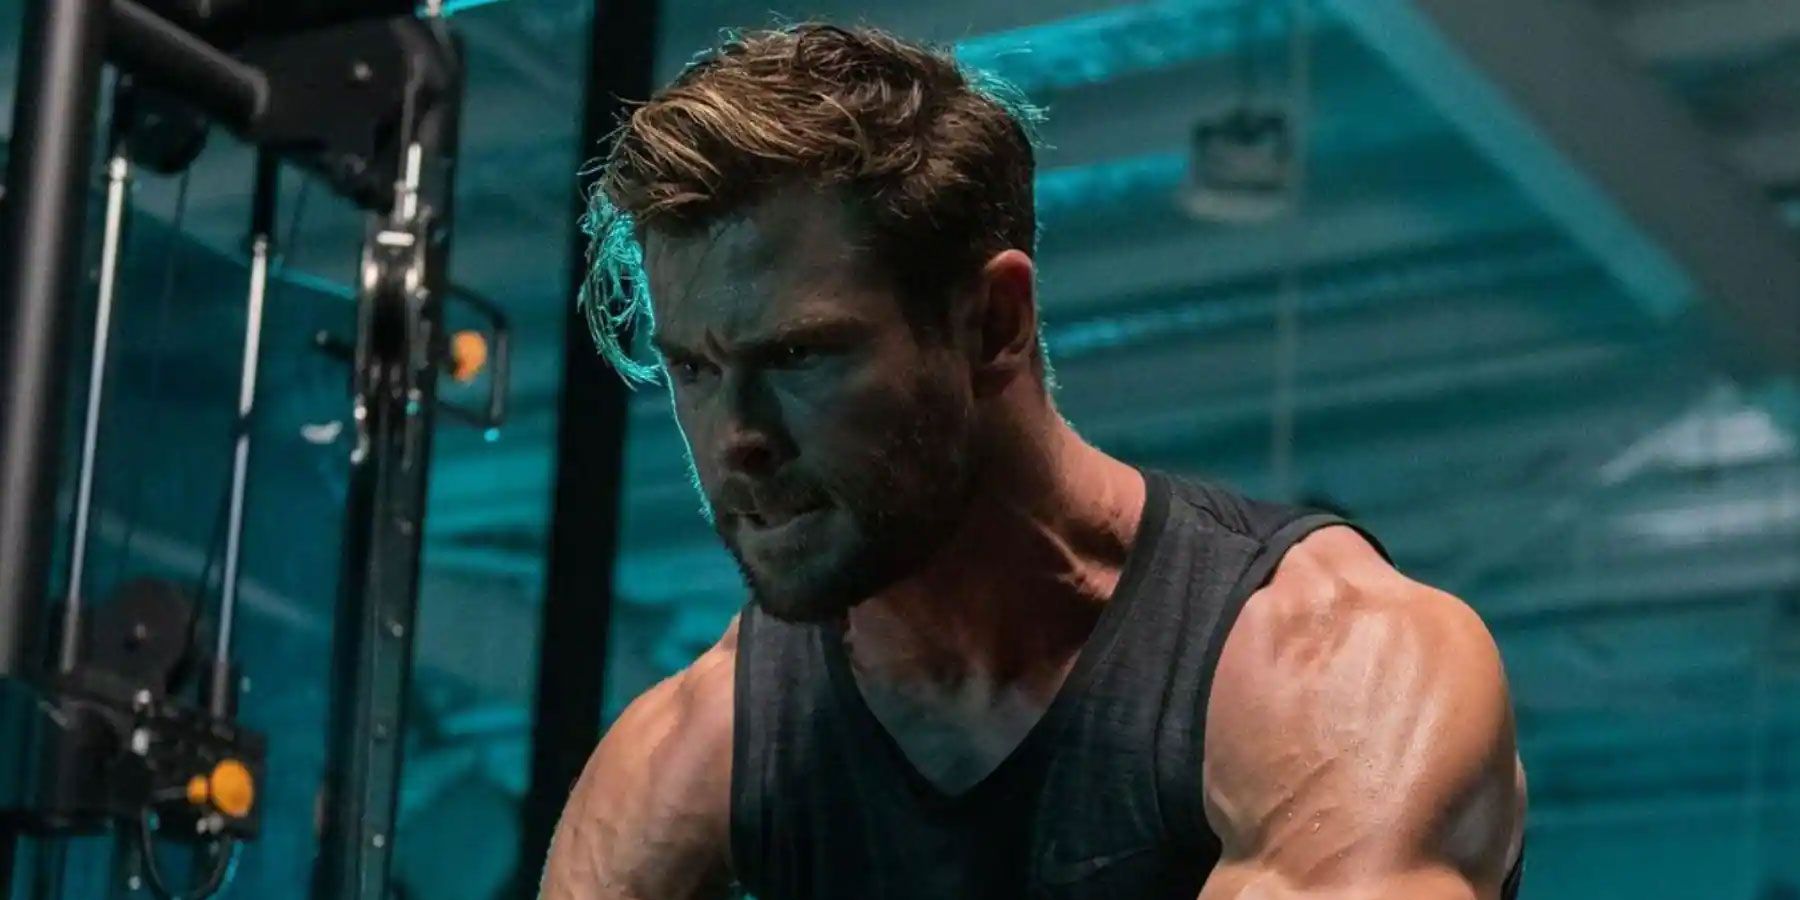 Chris Hemsworth working out inside a large industrial building.